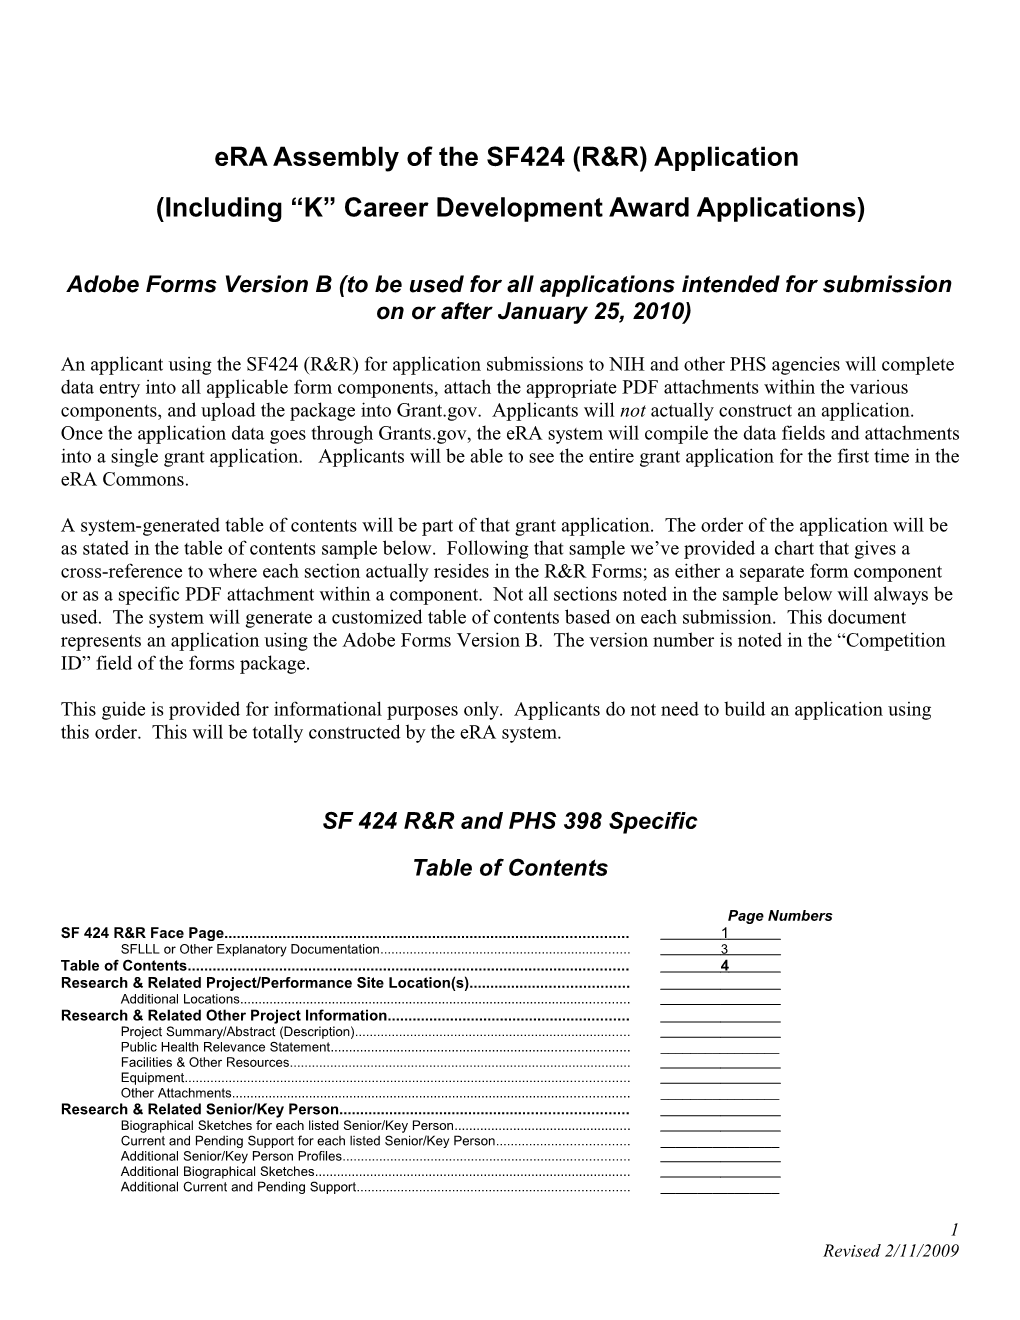 Era Assembly of the SF424 (R&R) Application (Adobe Forms Version A) - Updated: 02/12/2009